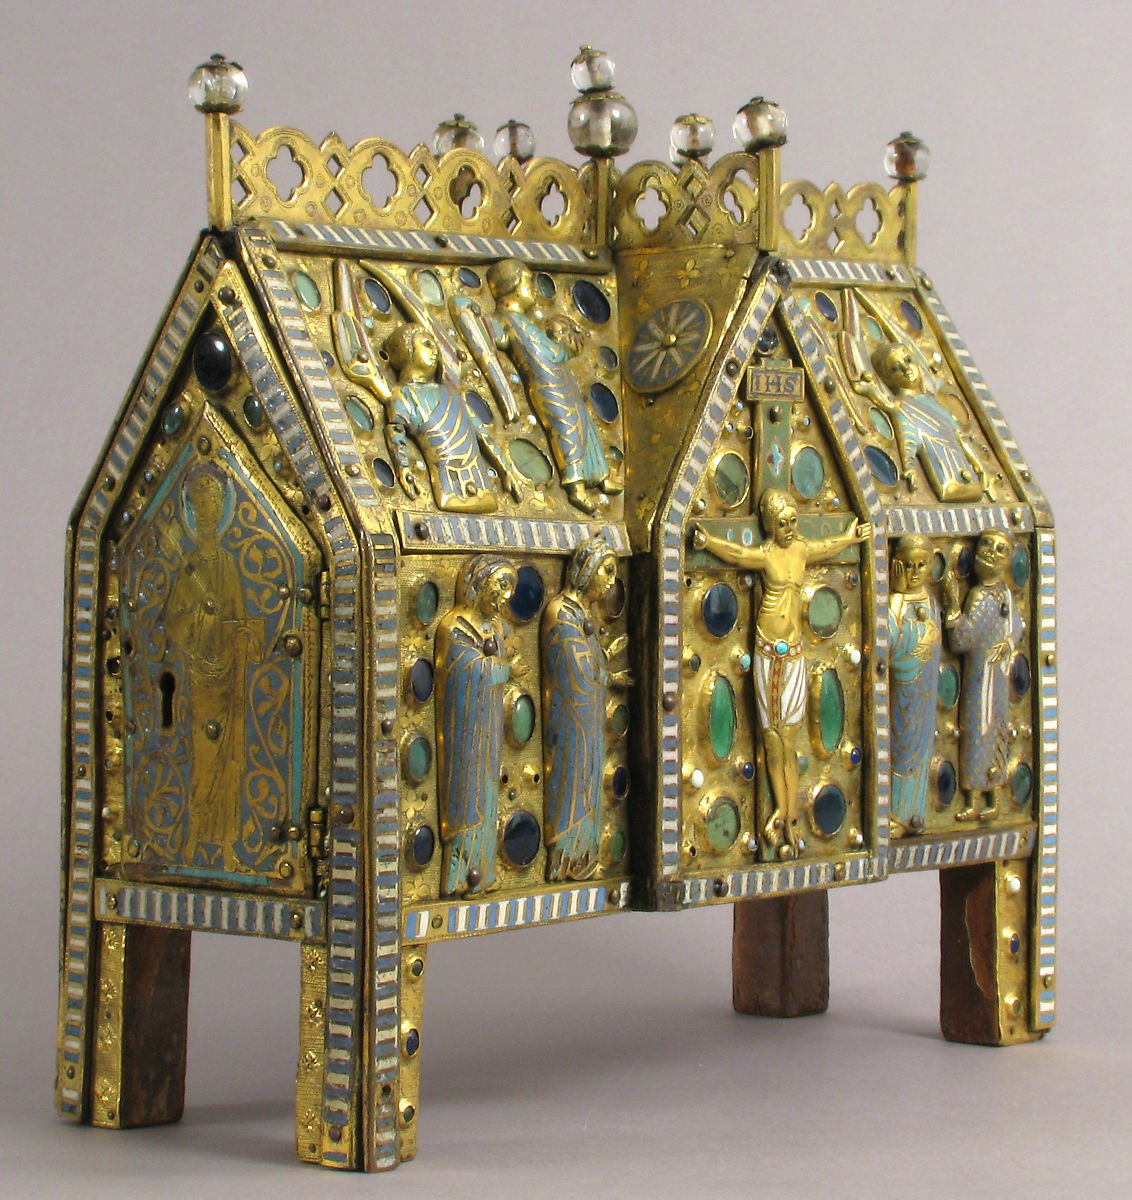 A reliquary is a repository of relics, that is, holy objects